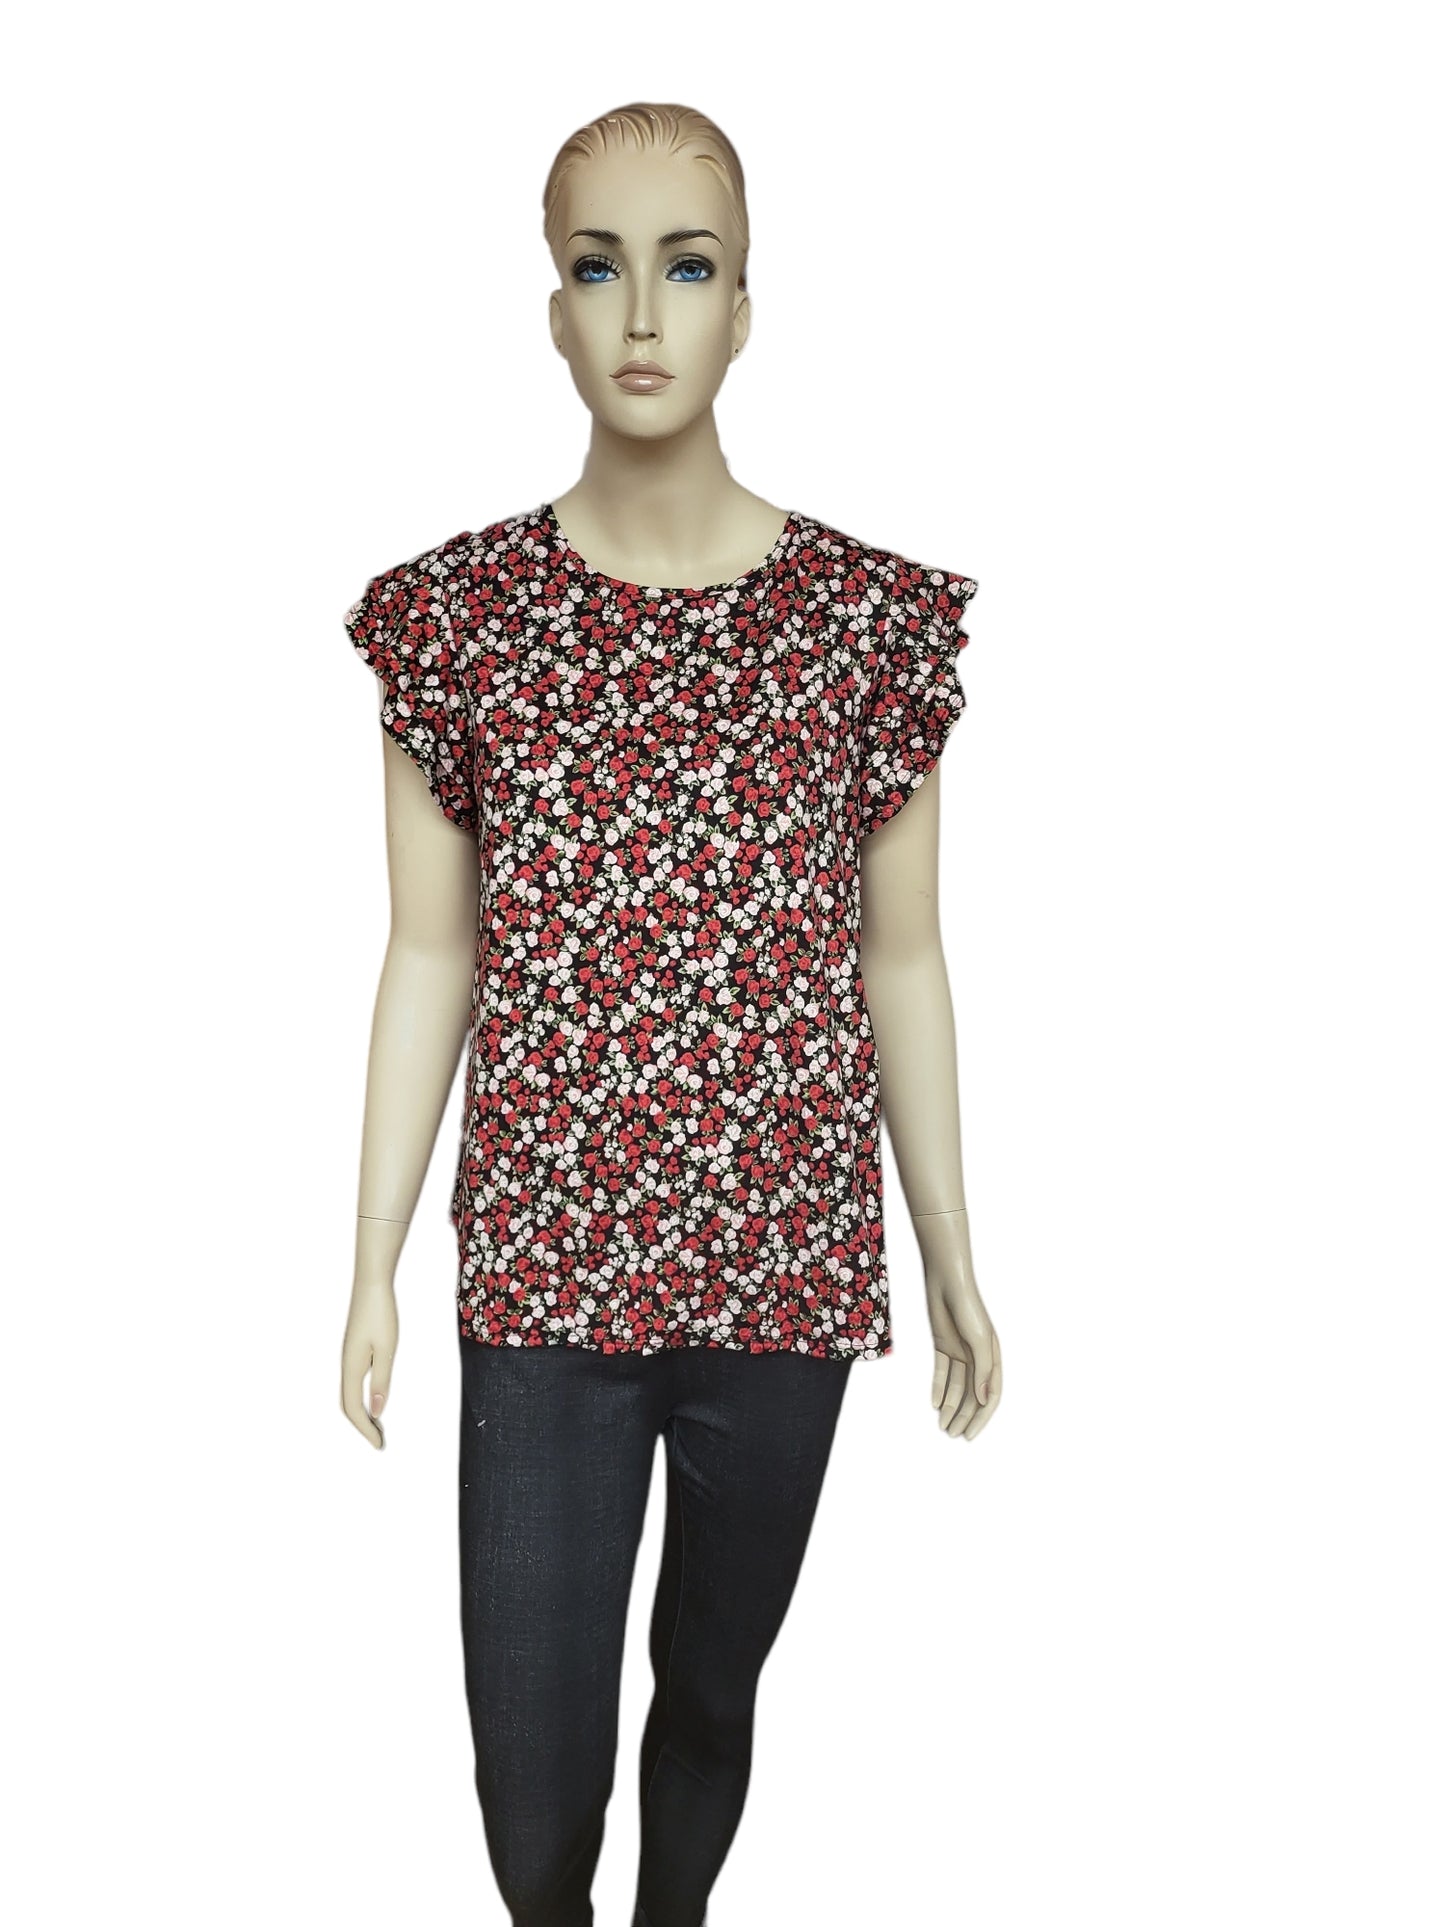 Floral Print in Red with Ruffled Sleeves